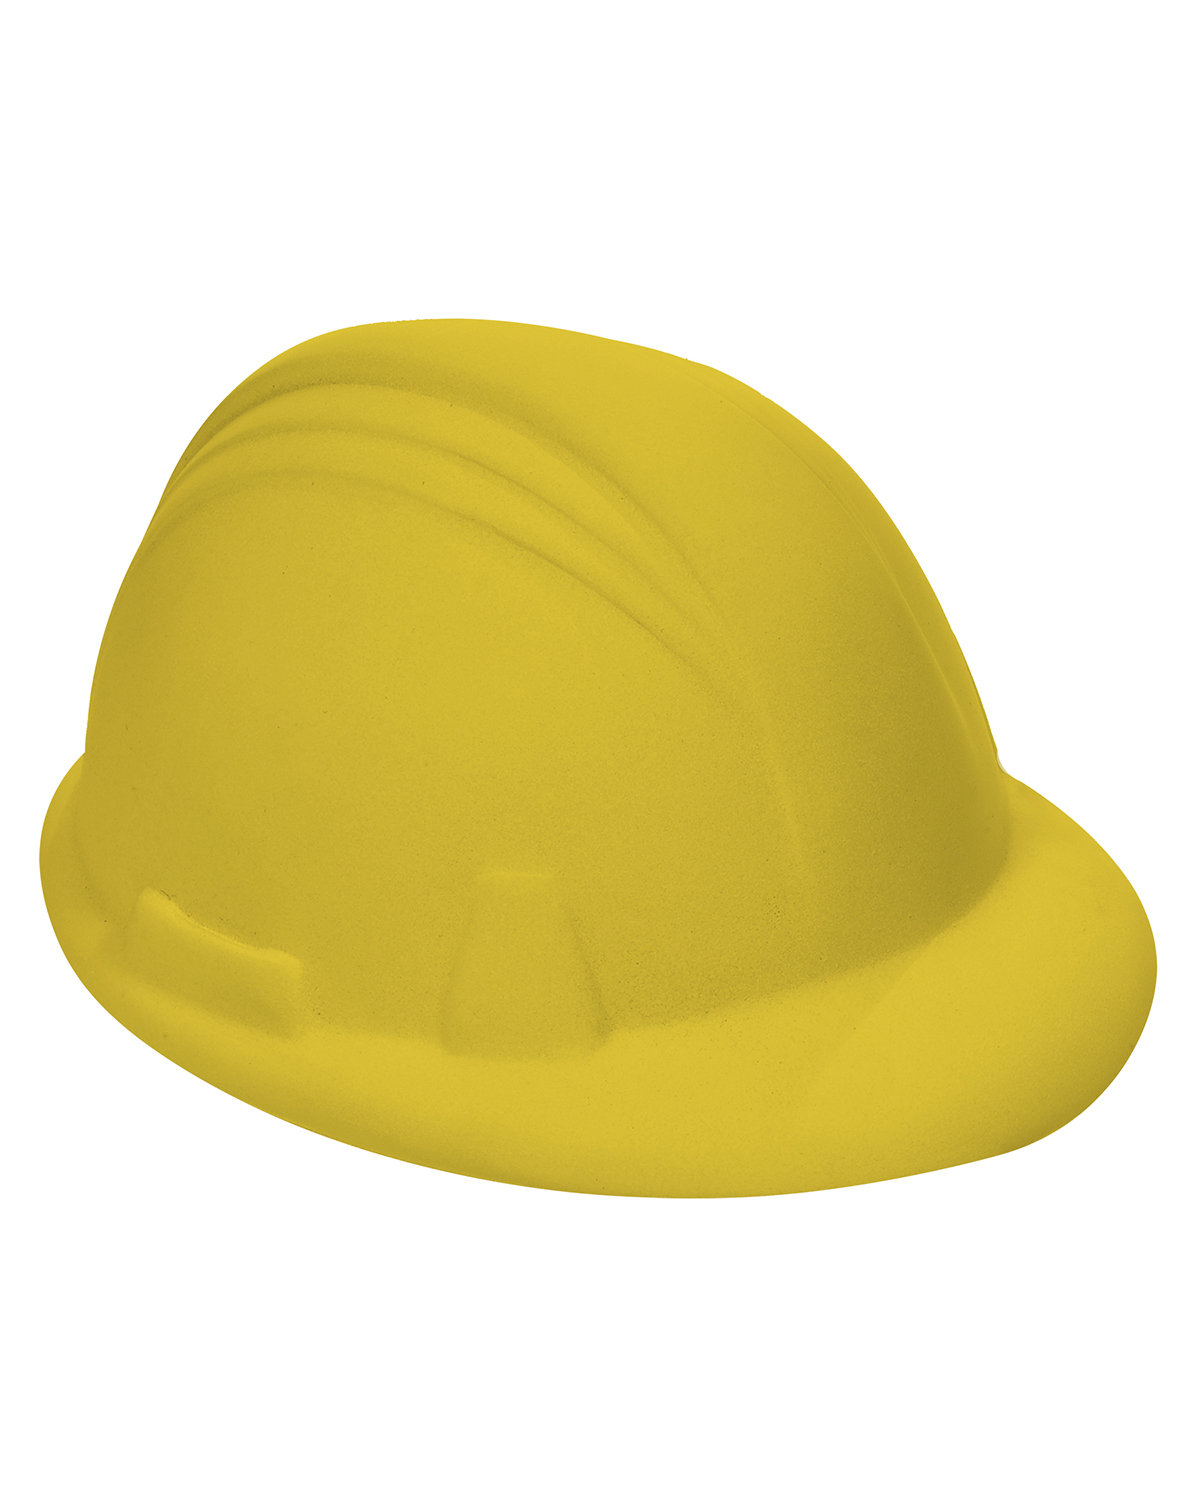 Prime Line Hard Hat Stress Reliever yellow 